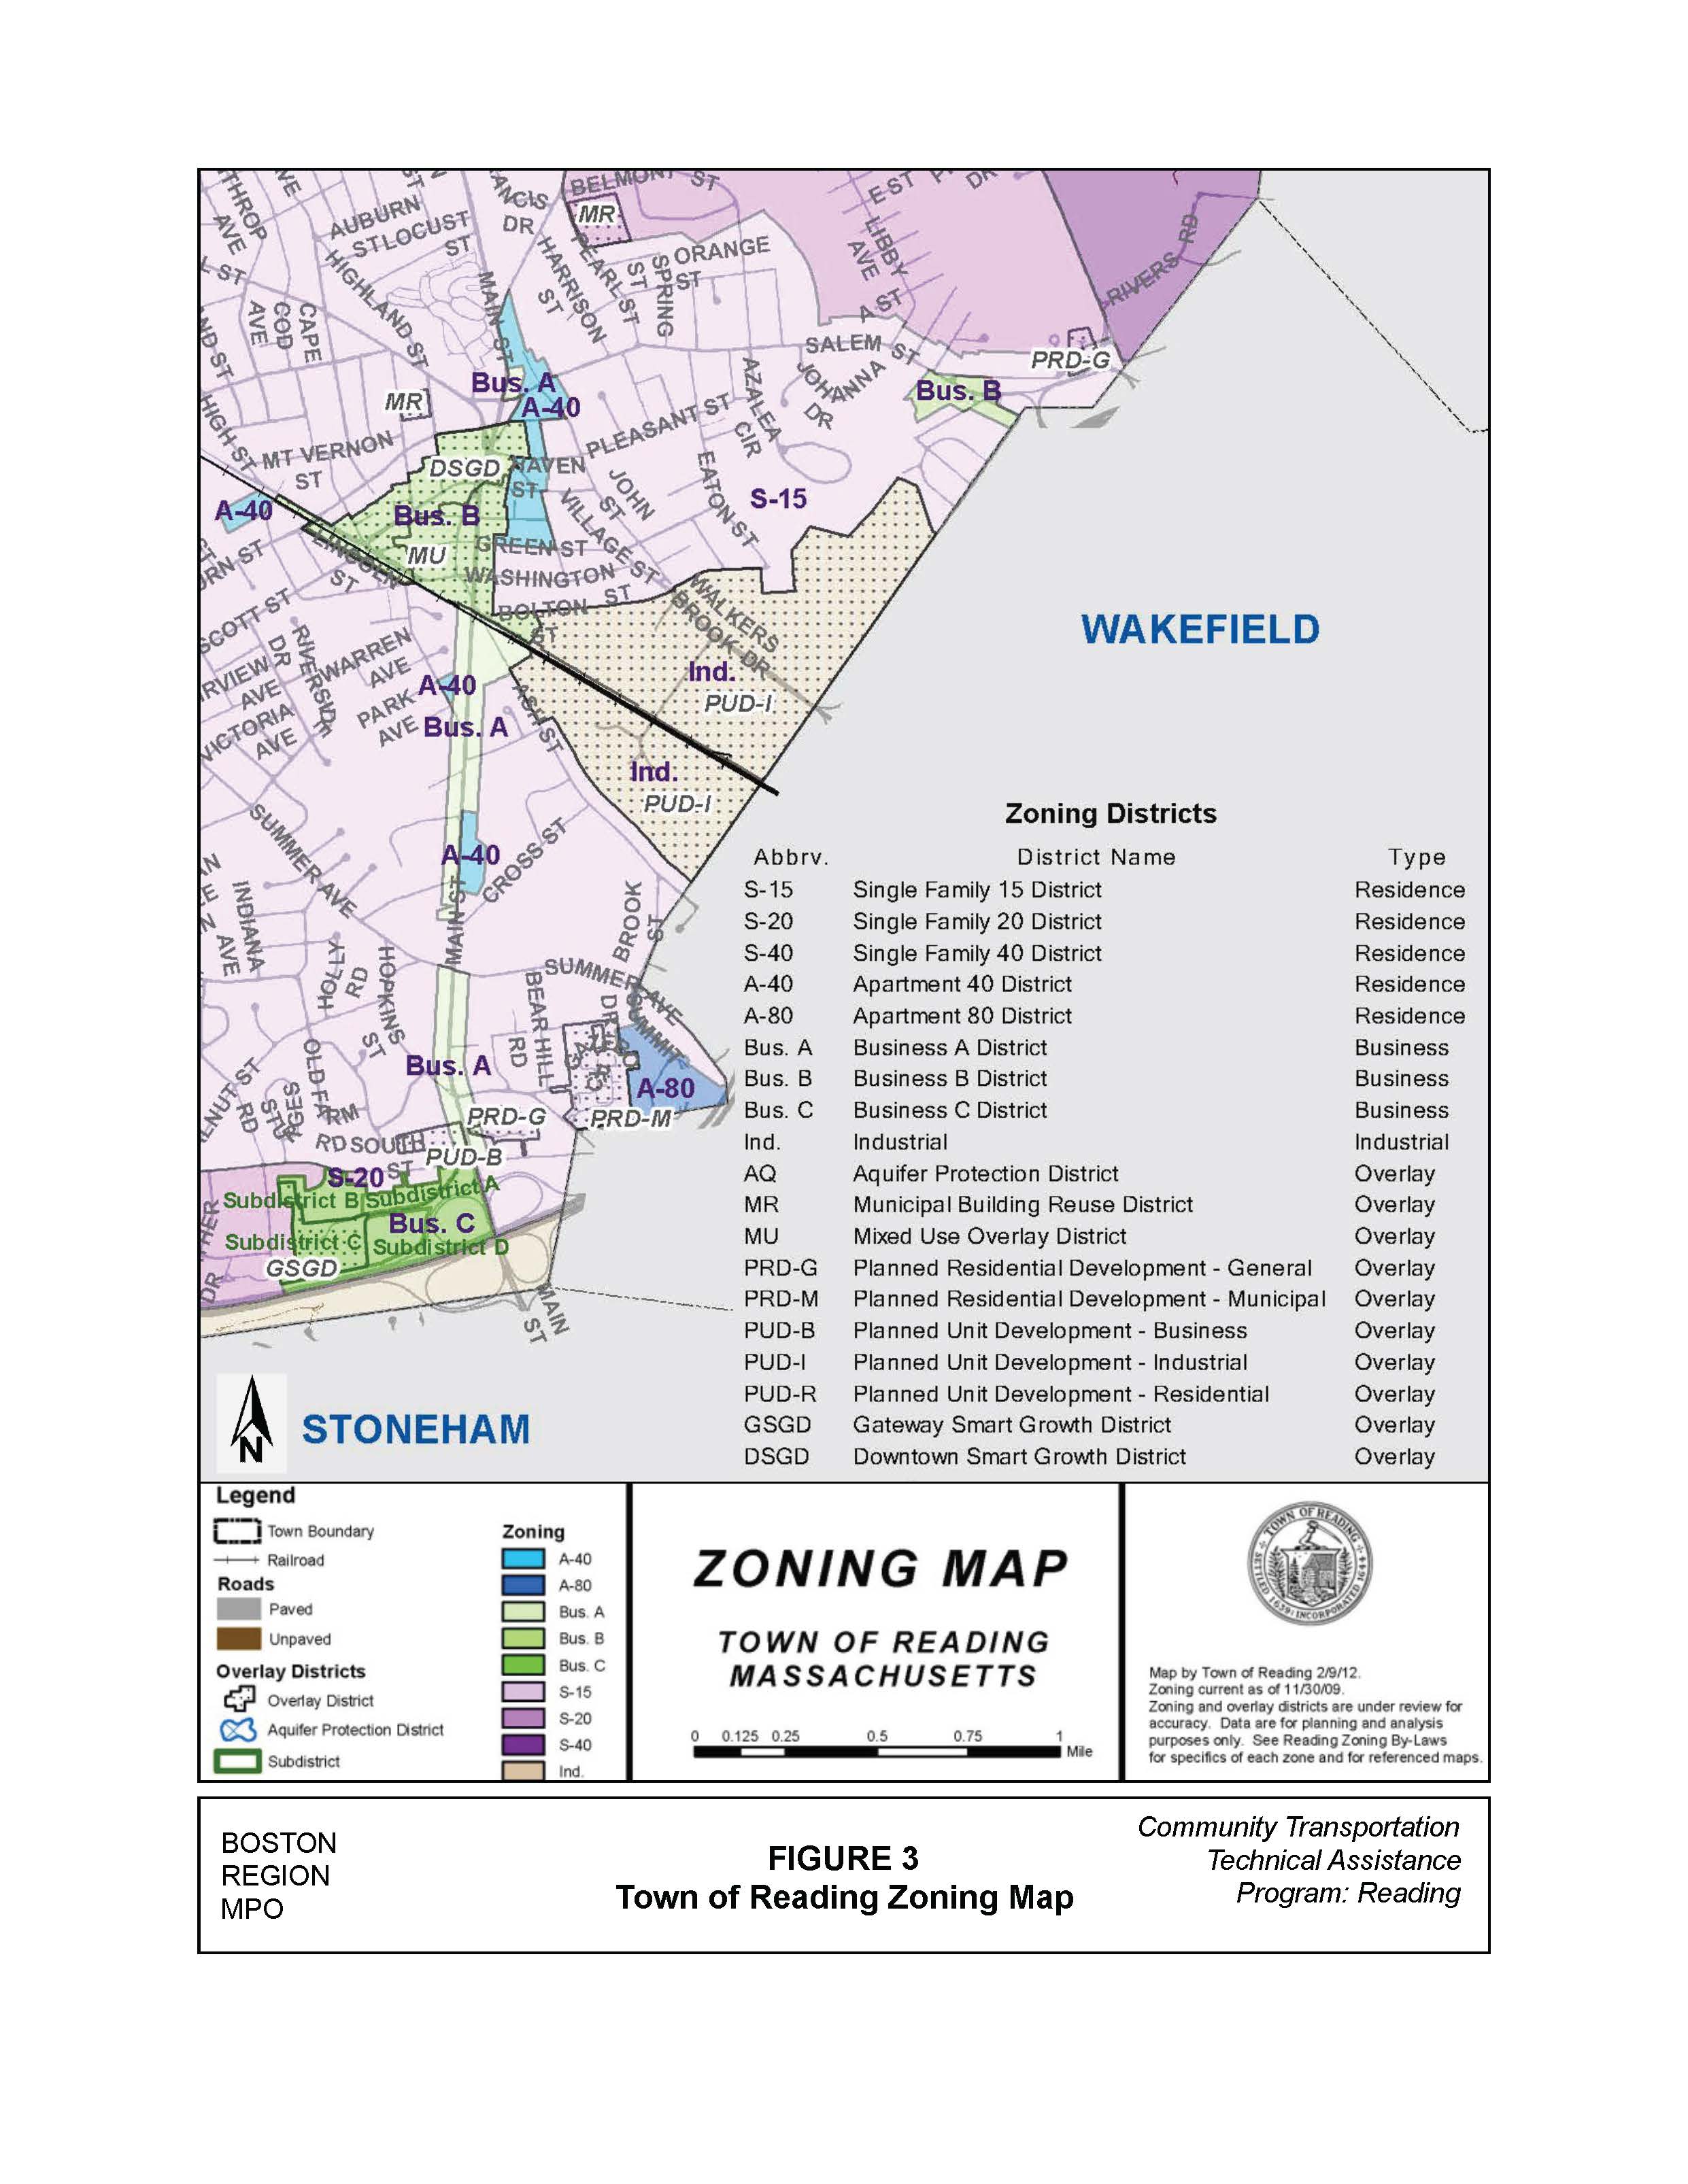 Zoning map for the Town of Reading.